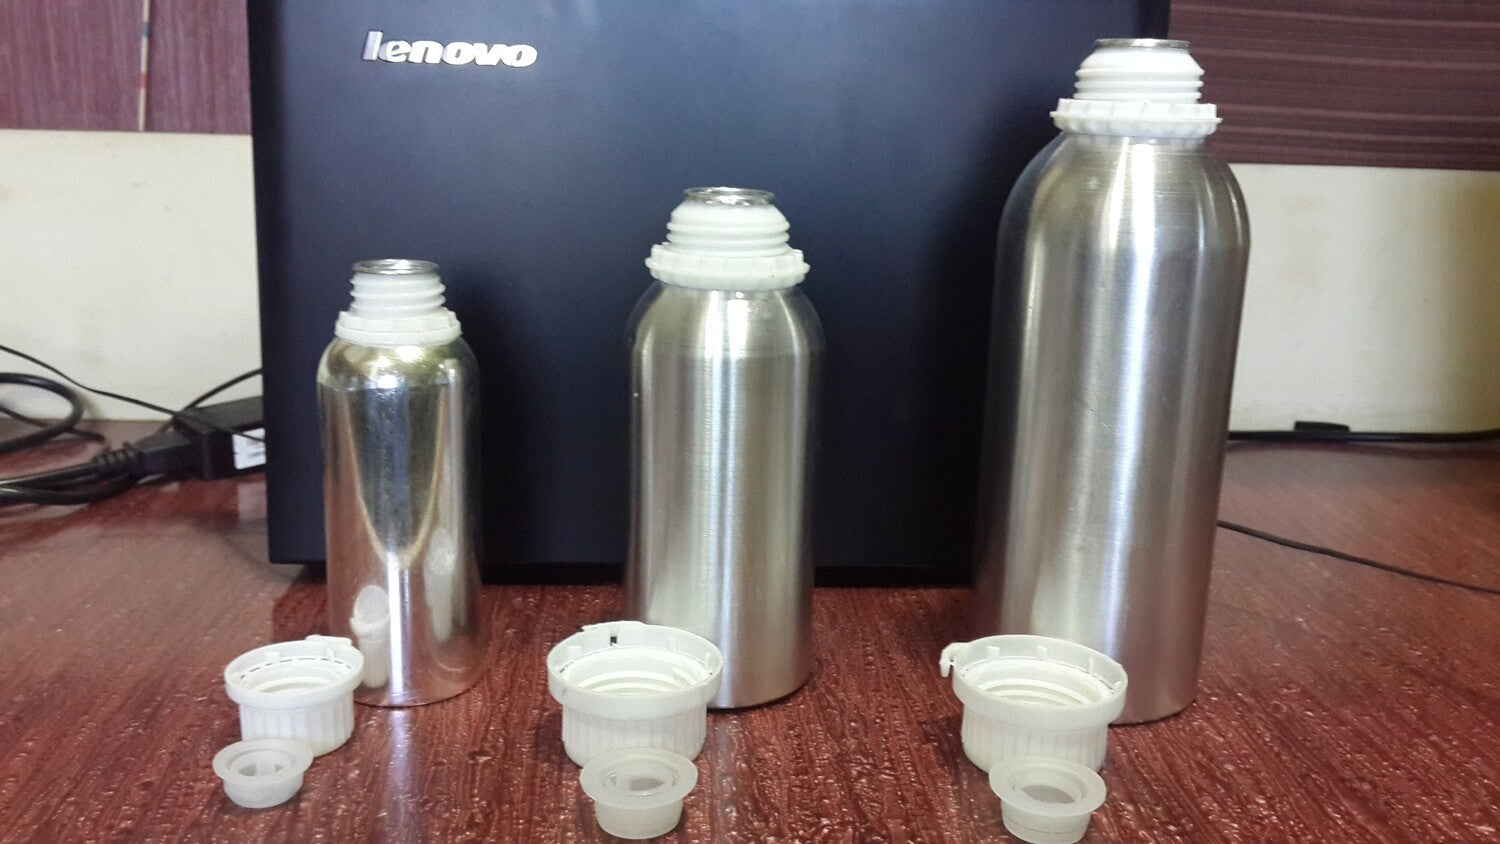 Aluminum Thermos style bottles USD $1.21 - $0.75 some companies we serve include, Carepac, 99designs, Annmarie skin care, All Good products, sttark, Skincare packaging, medtechnaturals.com, medtechindustries.com,  Skincare packaging suppliers, nice bottles supplies, skincare supplier, Velocitypropac.com, wholesale skin care packaging, yellow pages packaging companies,  cosmeticpackagingnow.com, allgoodproducts.com, helping beauty brands perform